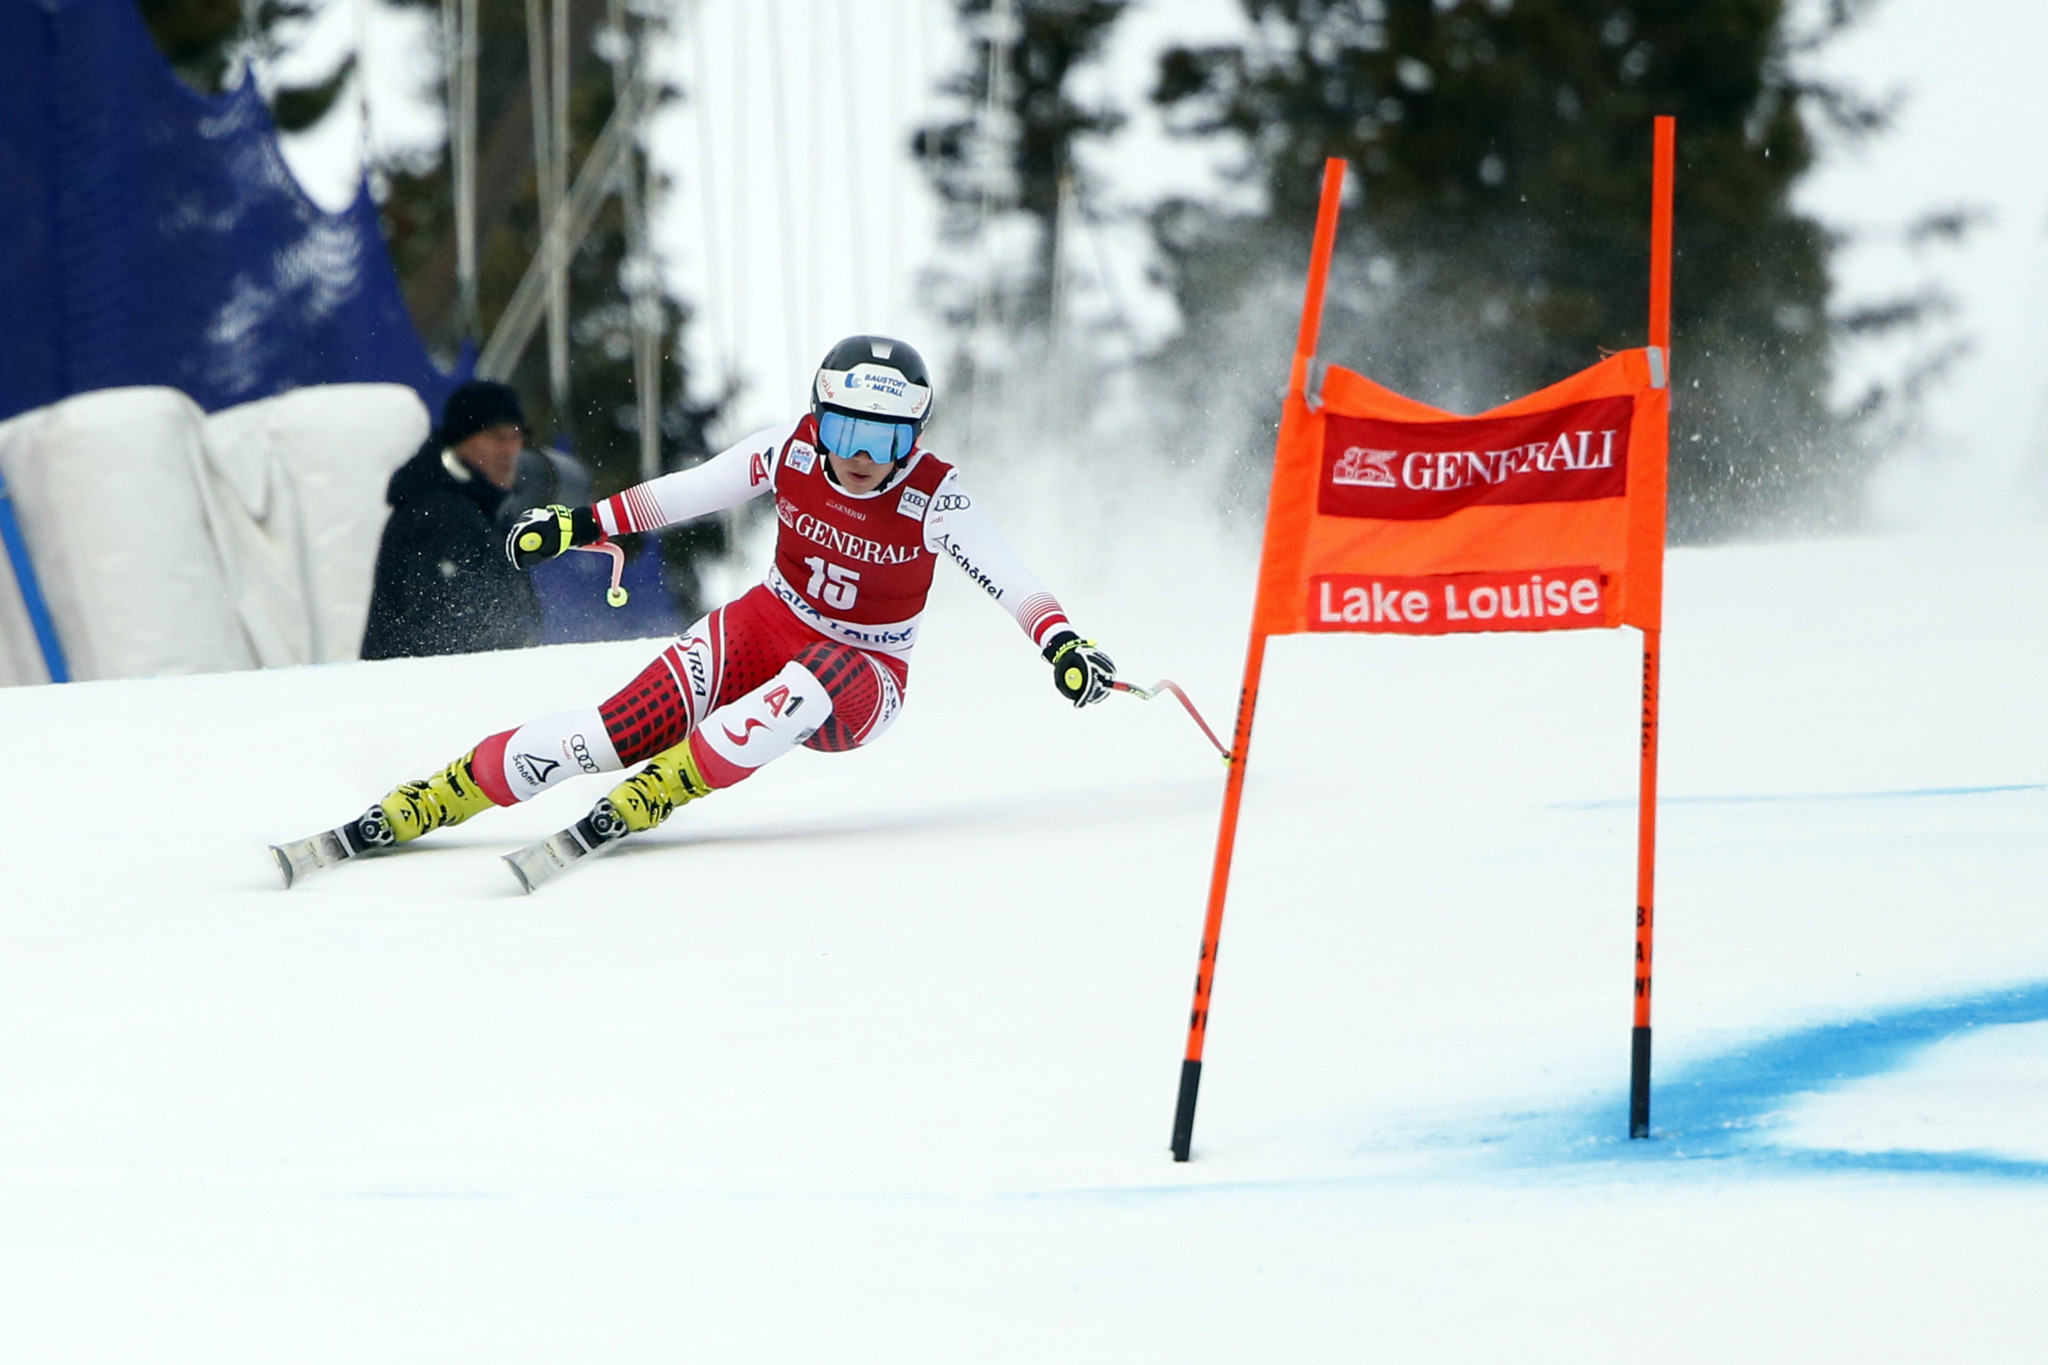 Nicole Schmidhofer of Austria triumphed in the women's downhill competition in Lake Louise ©Getty Images